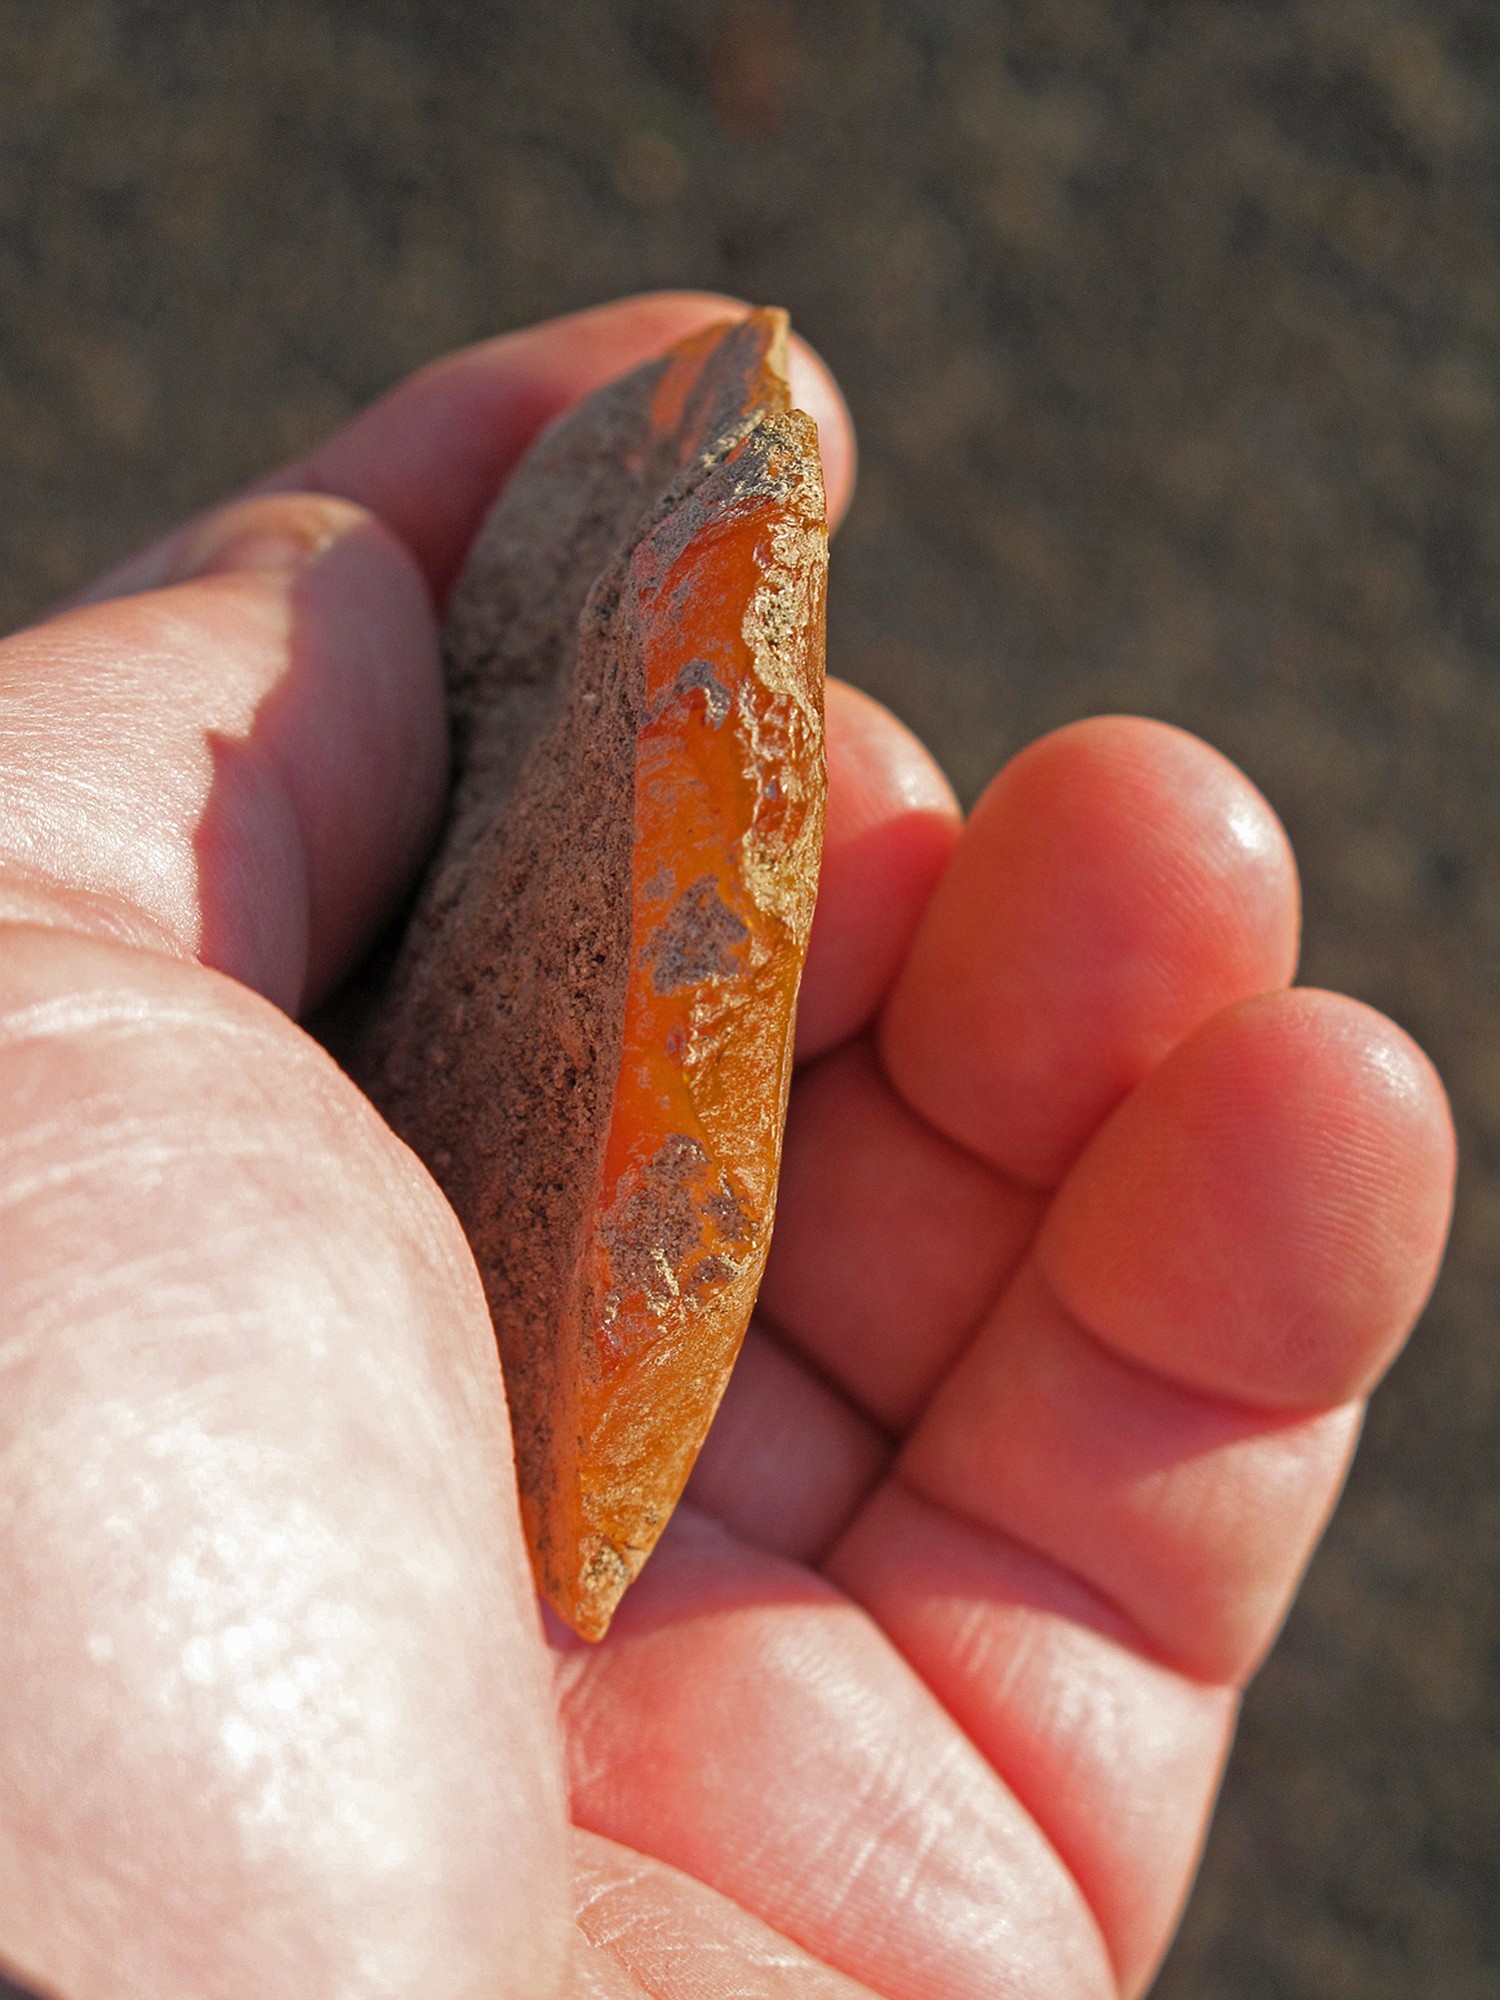 This scraper chipped out of agate was found at an ancient rock shelter in the high desert of eastern Oregon. The find was announced Thursday.